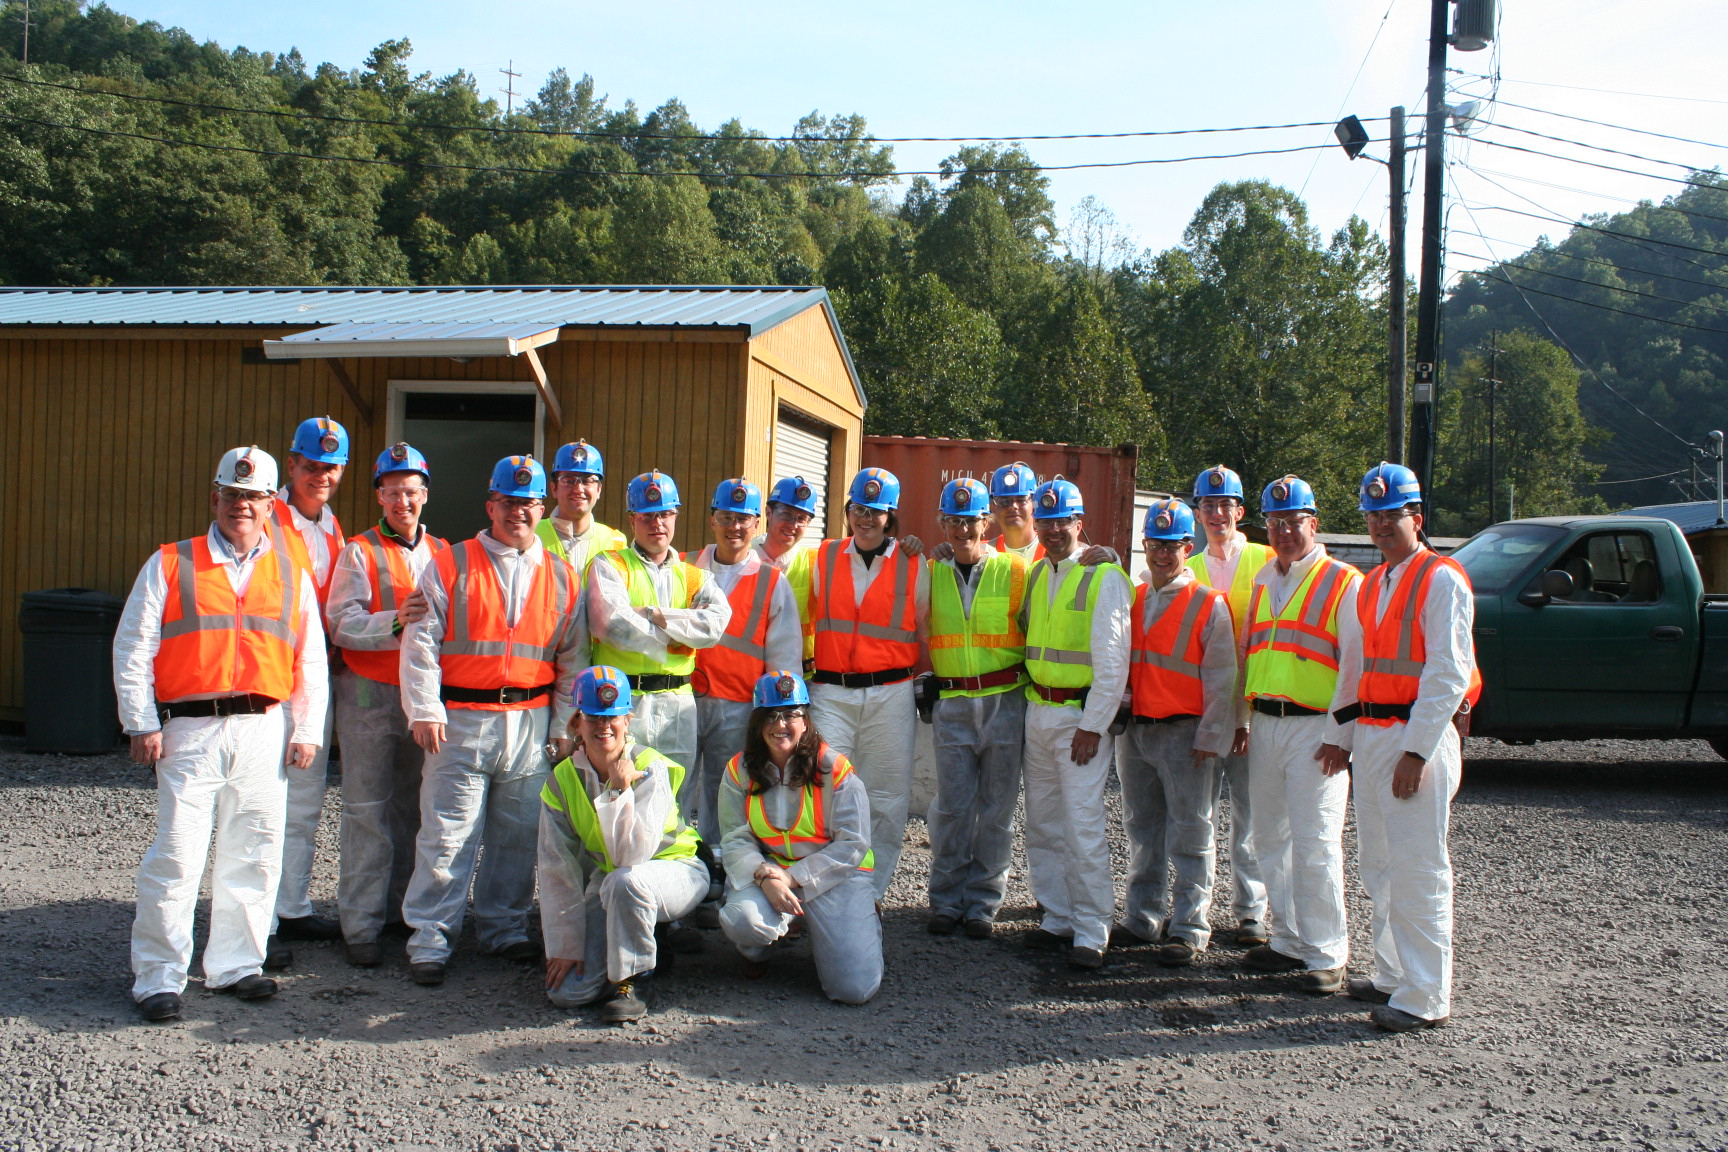 Group photo with everyone wearing coal miners hats and bright safety vests